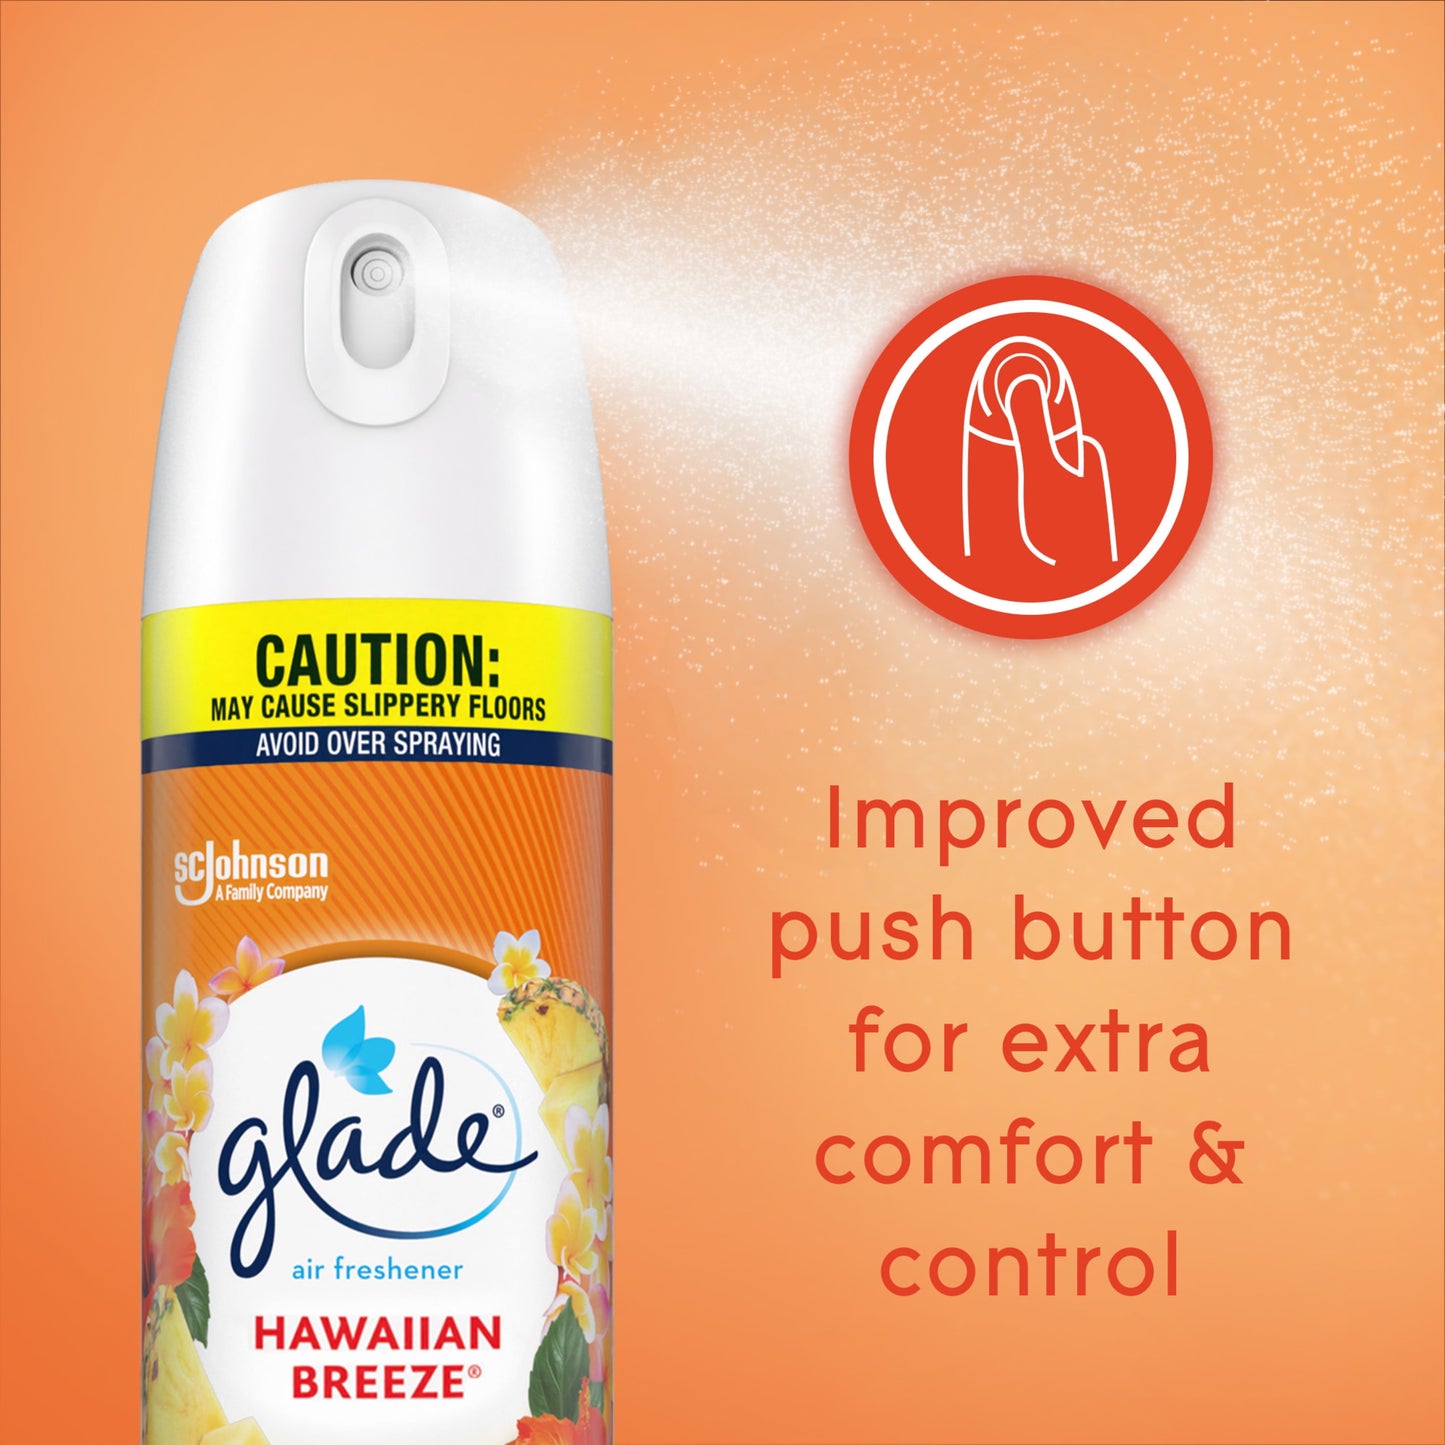 Glade Aerosol Spray, Air Freshener for Home, Hawaiian Breeze Scent, Fragrance Infused with Essential Oils, Invigorating and Refreshing, with 100% Natural Propellent, 8.3 oz